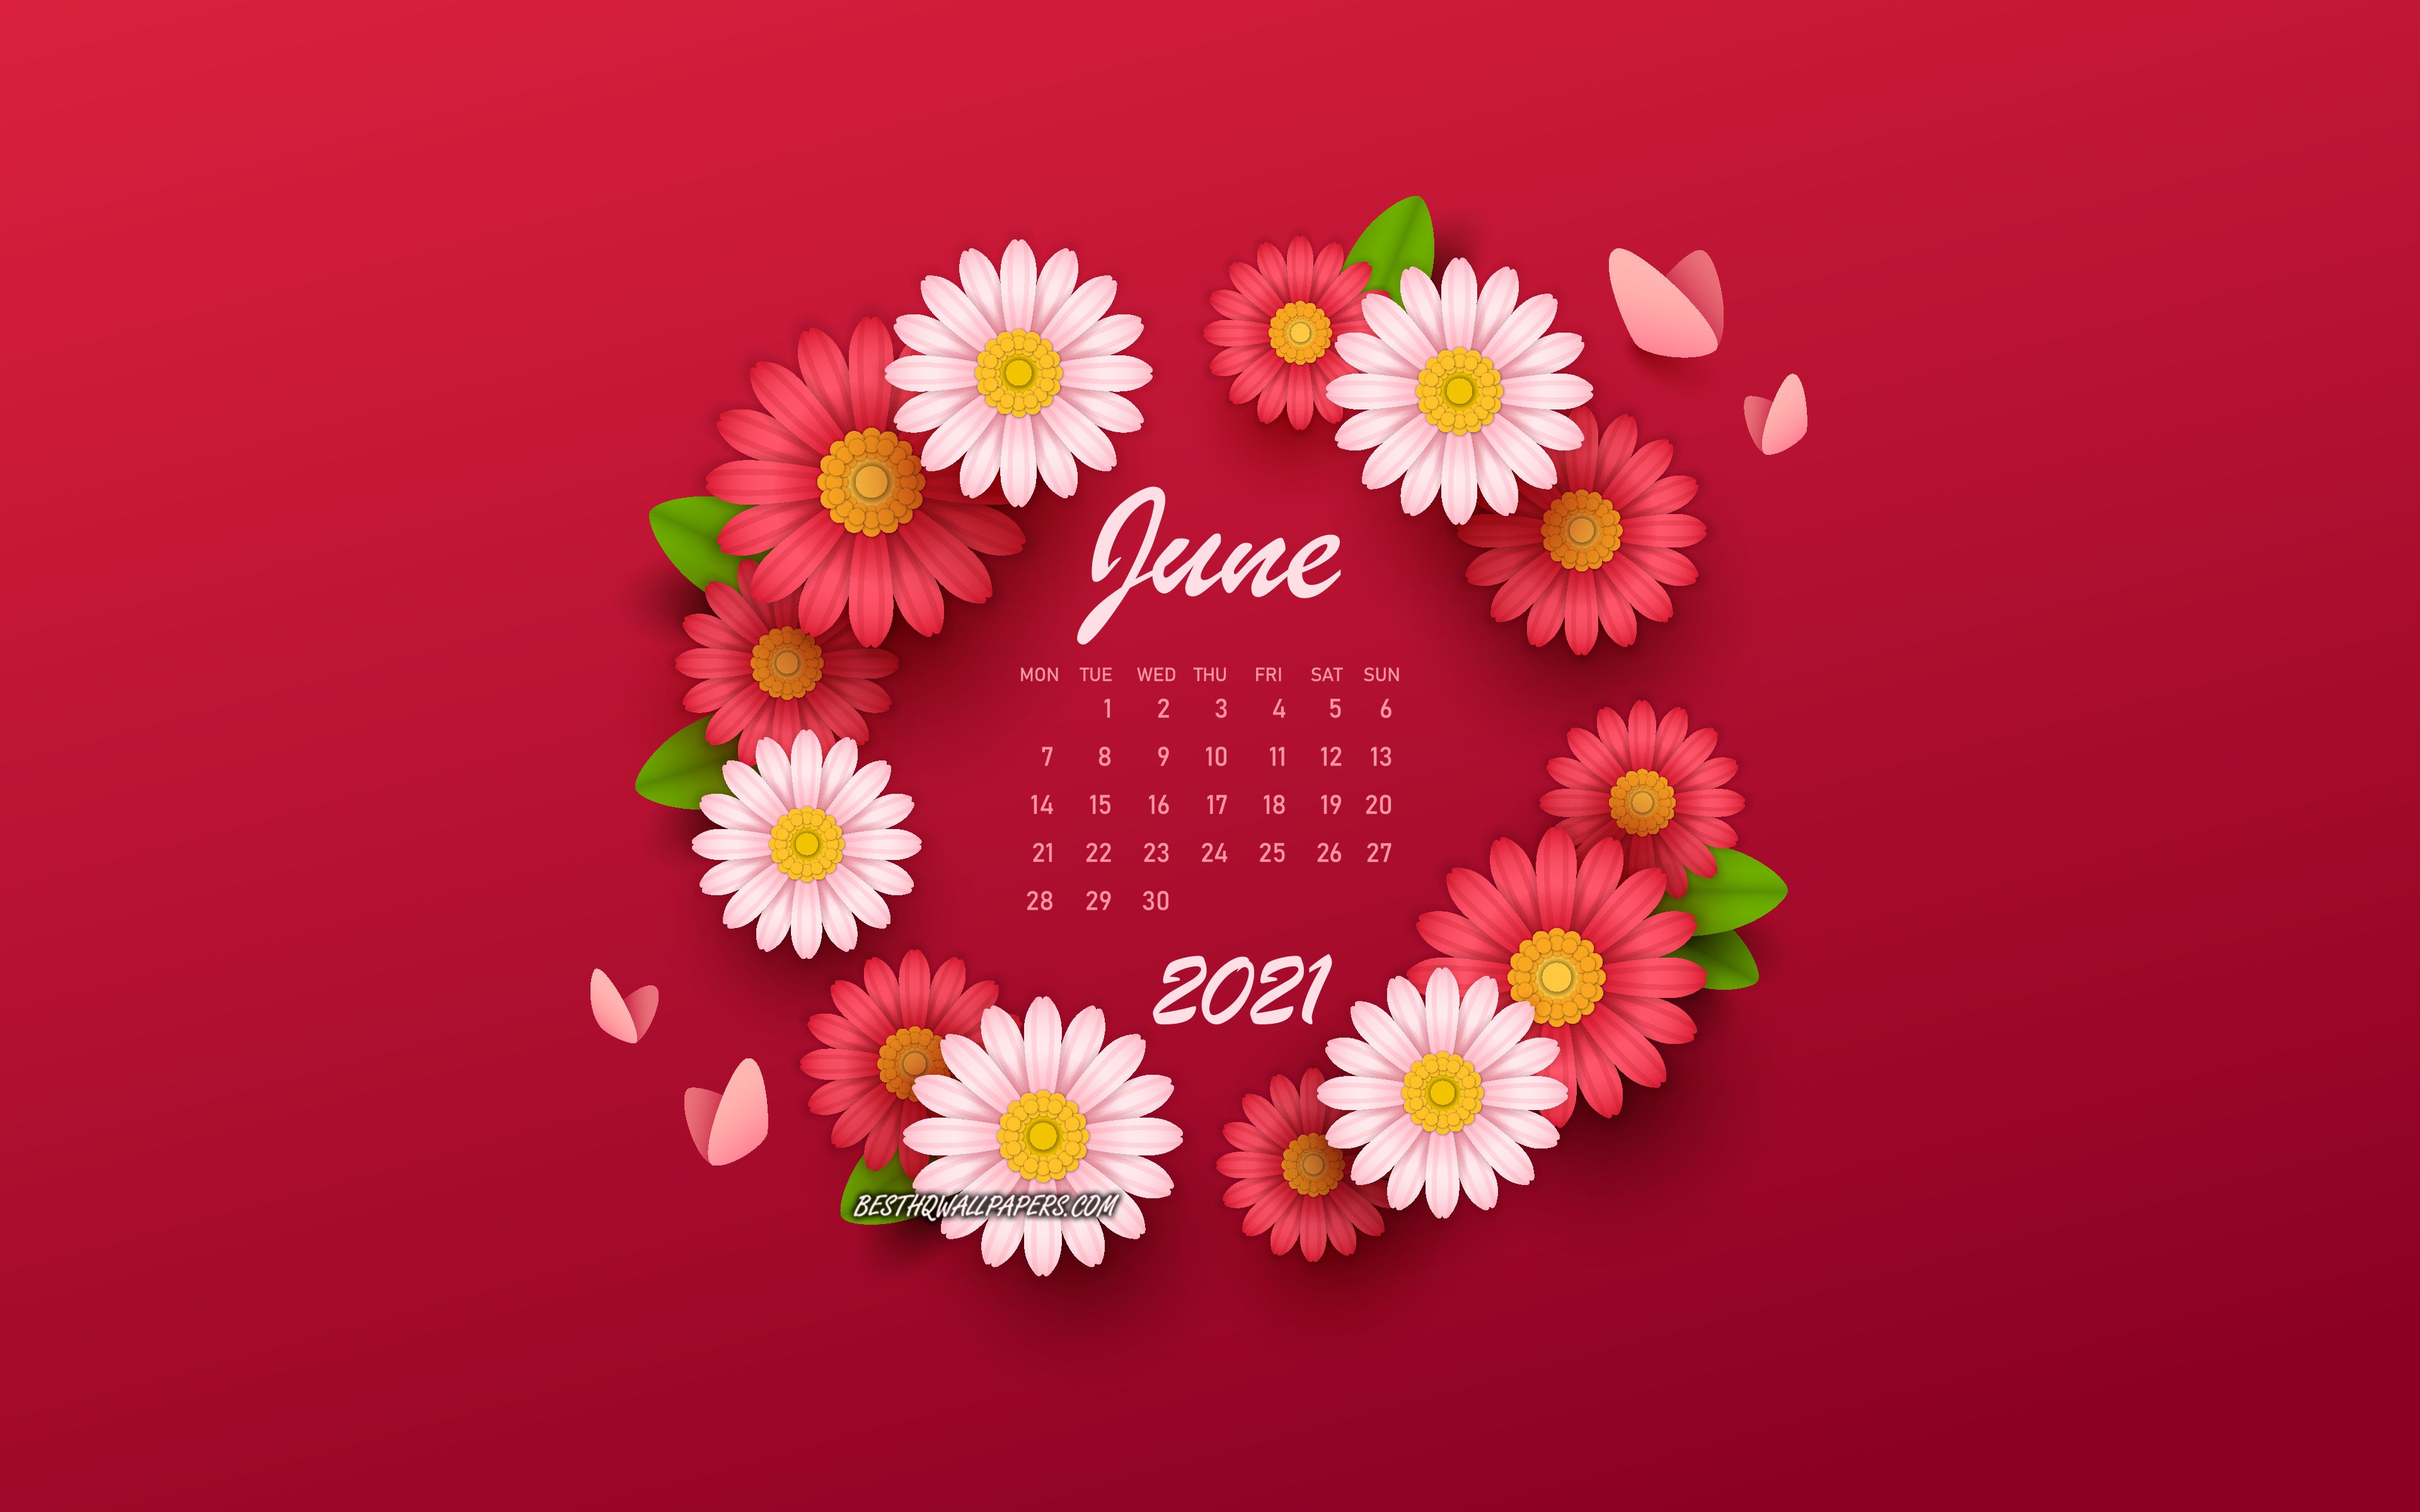 Download wallpaper 2021 June Calendar, background with flowers, 2021 summer calendars, June, 2021 calendars, June 2021 Calendar for desktop with resolution 3840x2400. High Quality HD picture wallpaper